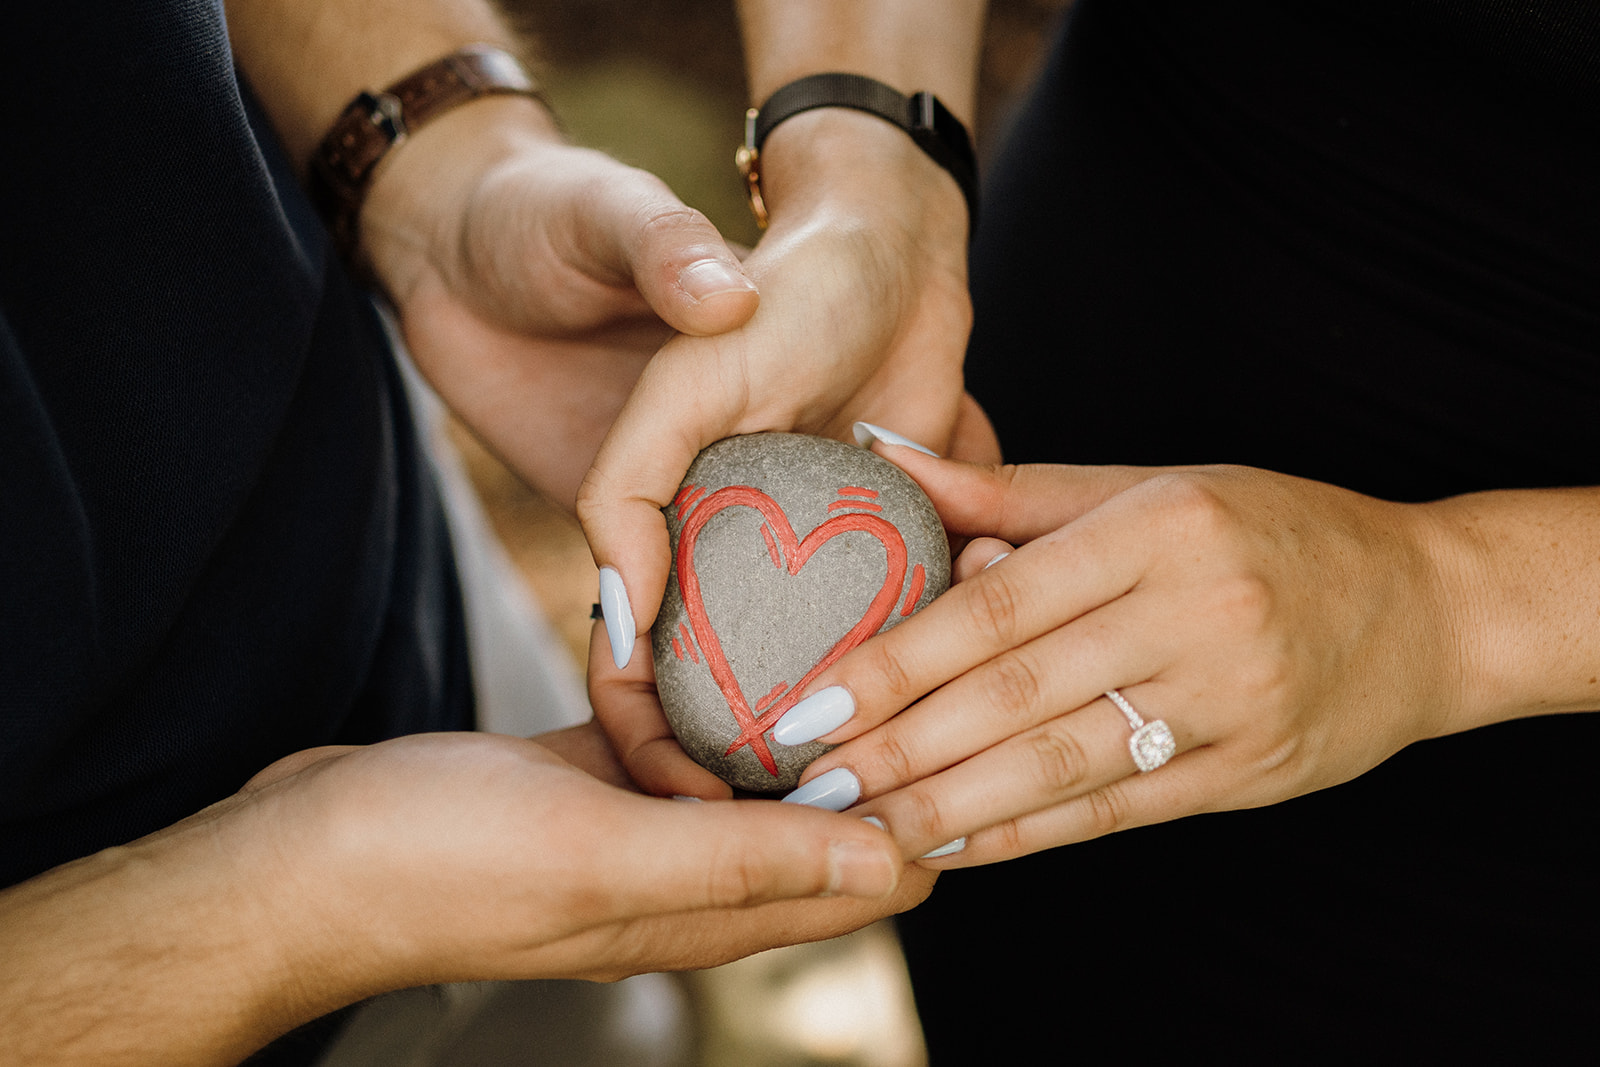 Hands holding a rock with a heart on it.  One of the hands have an engagement ring on.